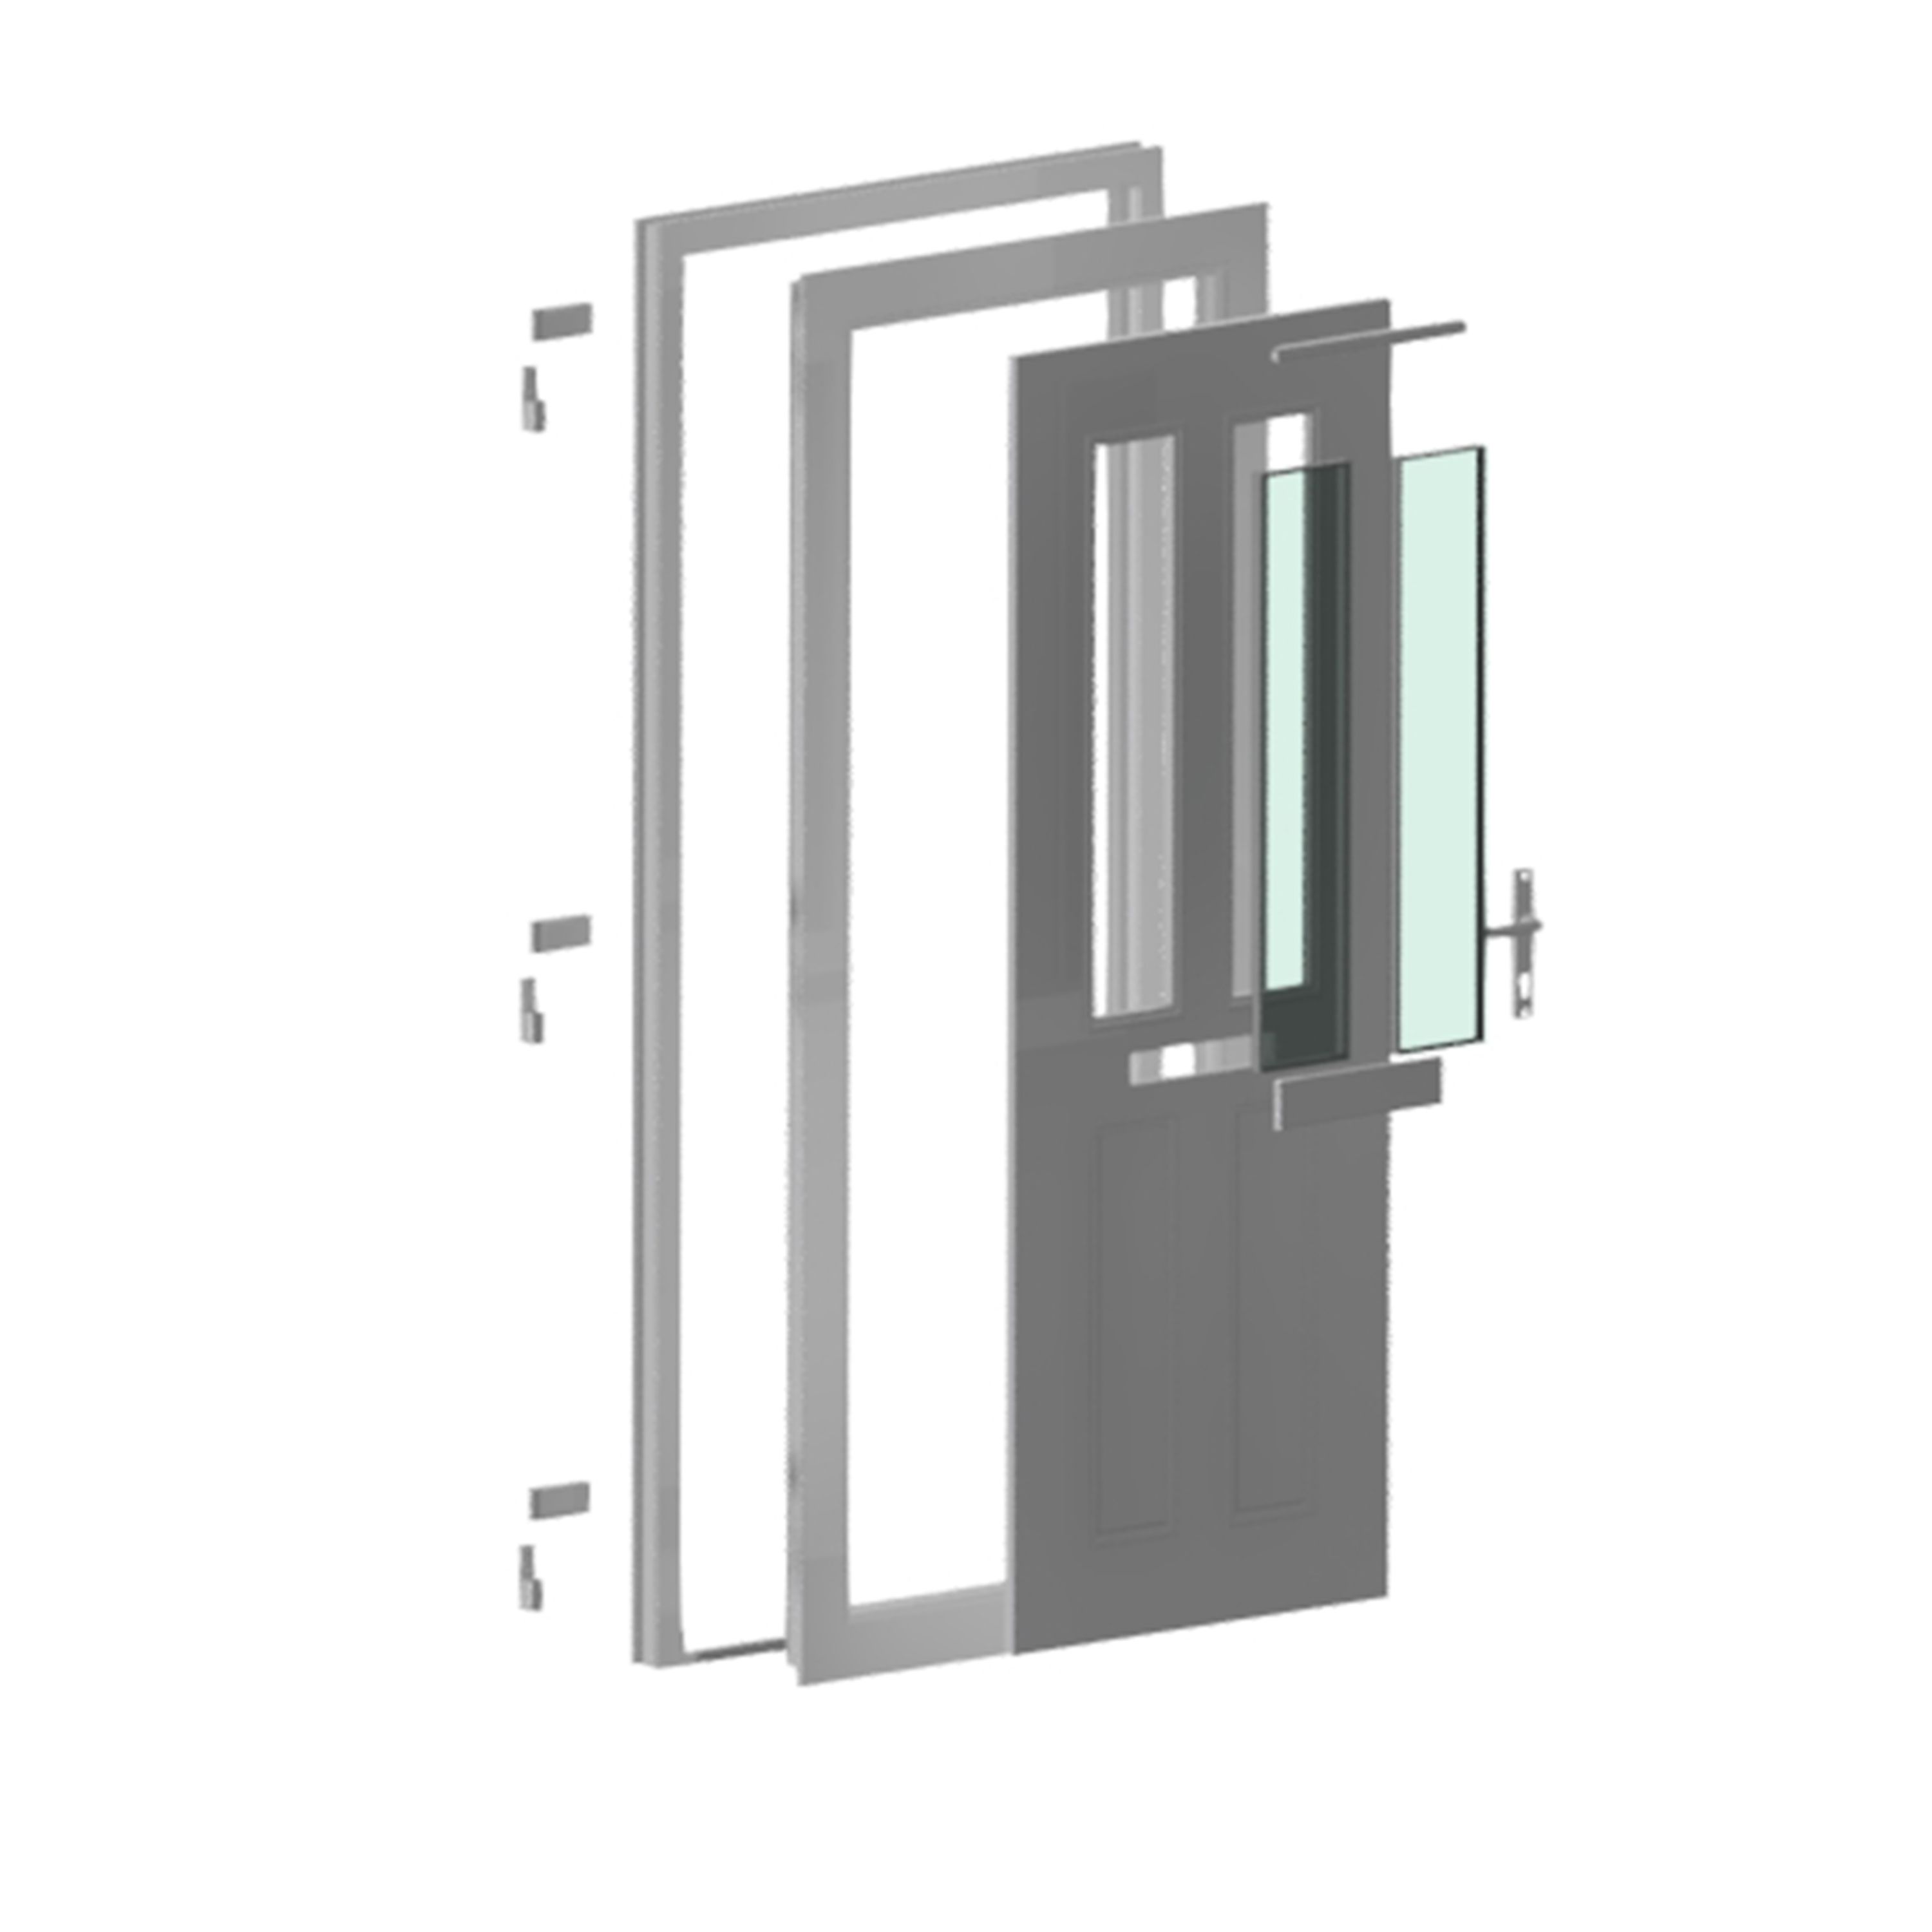 Fortia Chesil Frosted Glazed White RH External Front Door set, (H)2085mm (W)920mm